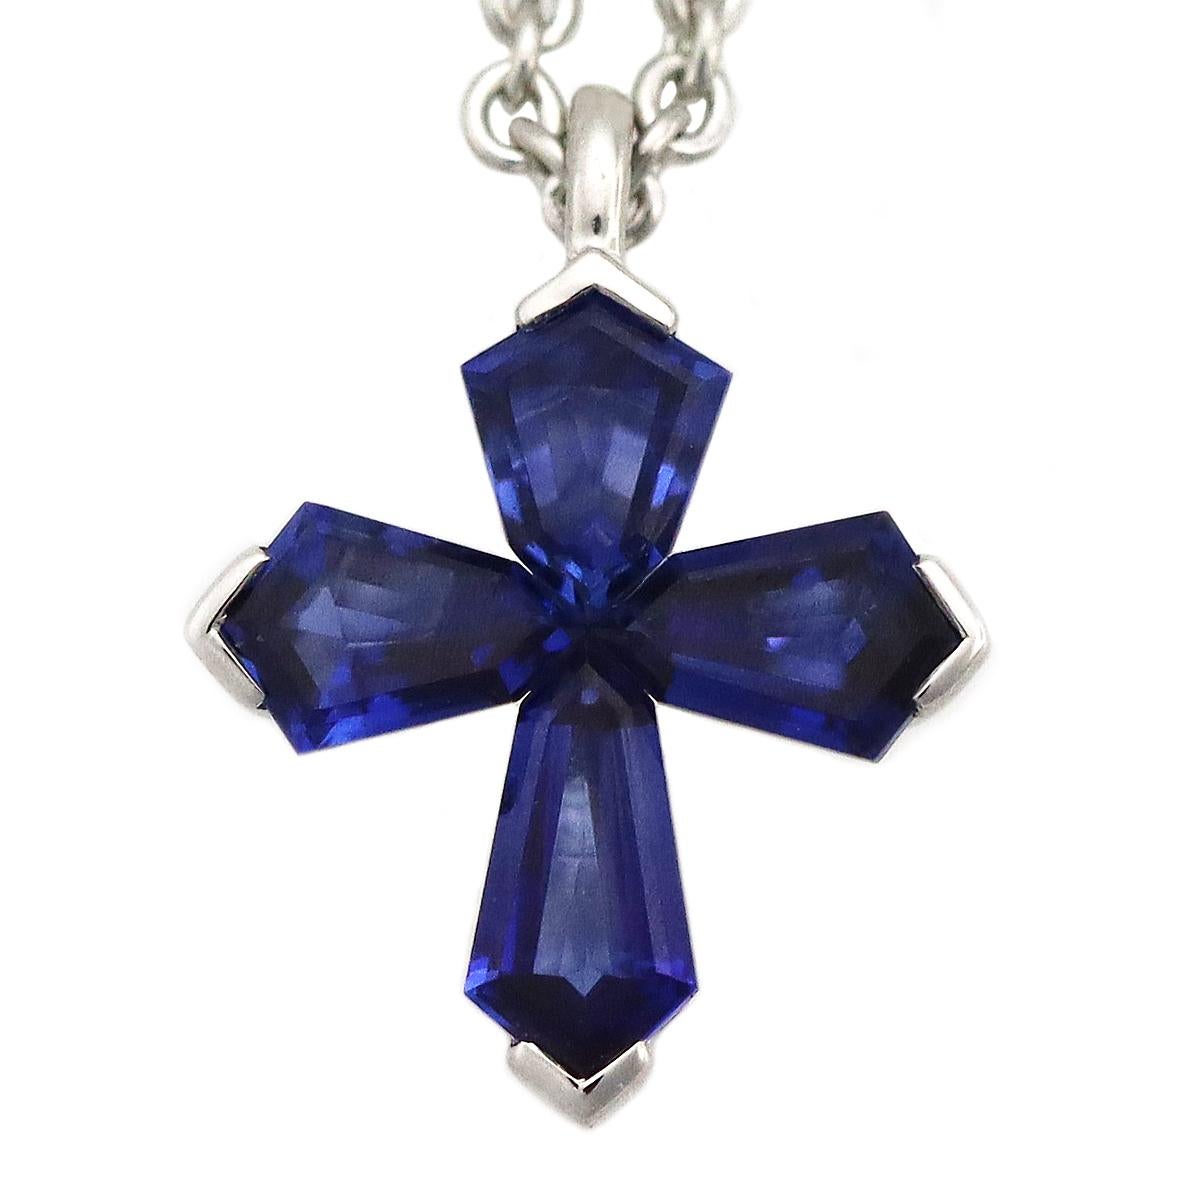 Brand:GRAFF
Retail Price:JPY780,000円(include tax)
Name:Trapezoid Cross Pendant Necklace Small
Material:Blue sapphire, 750 K18 WG white gold
Weight:3.2g（Approx)
neck around:40cm / 15.74in（Approx)
Top size:H9.30mm×W8.60mm /